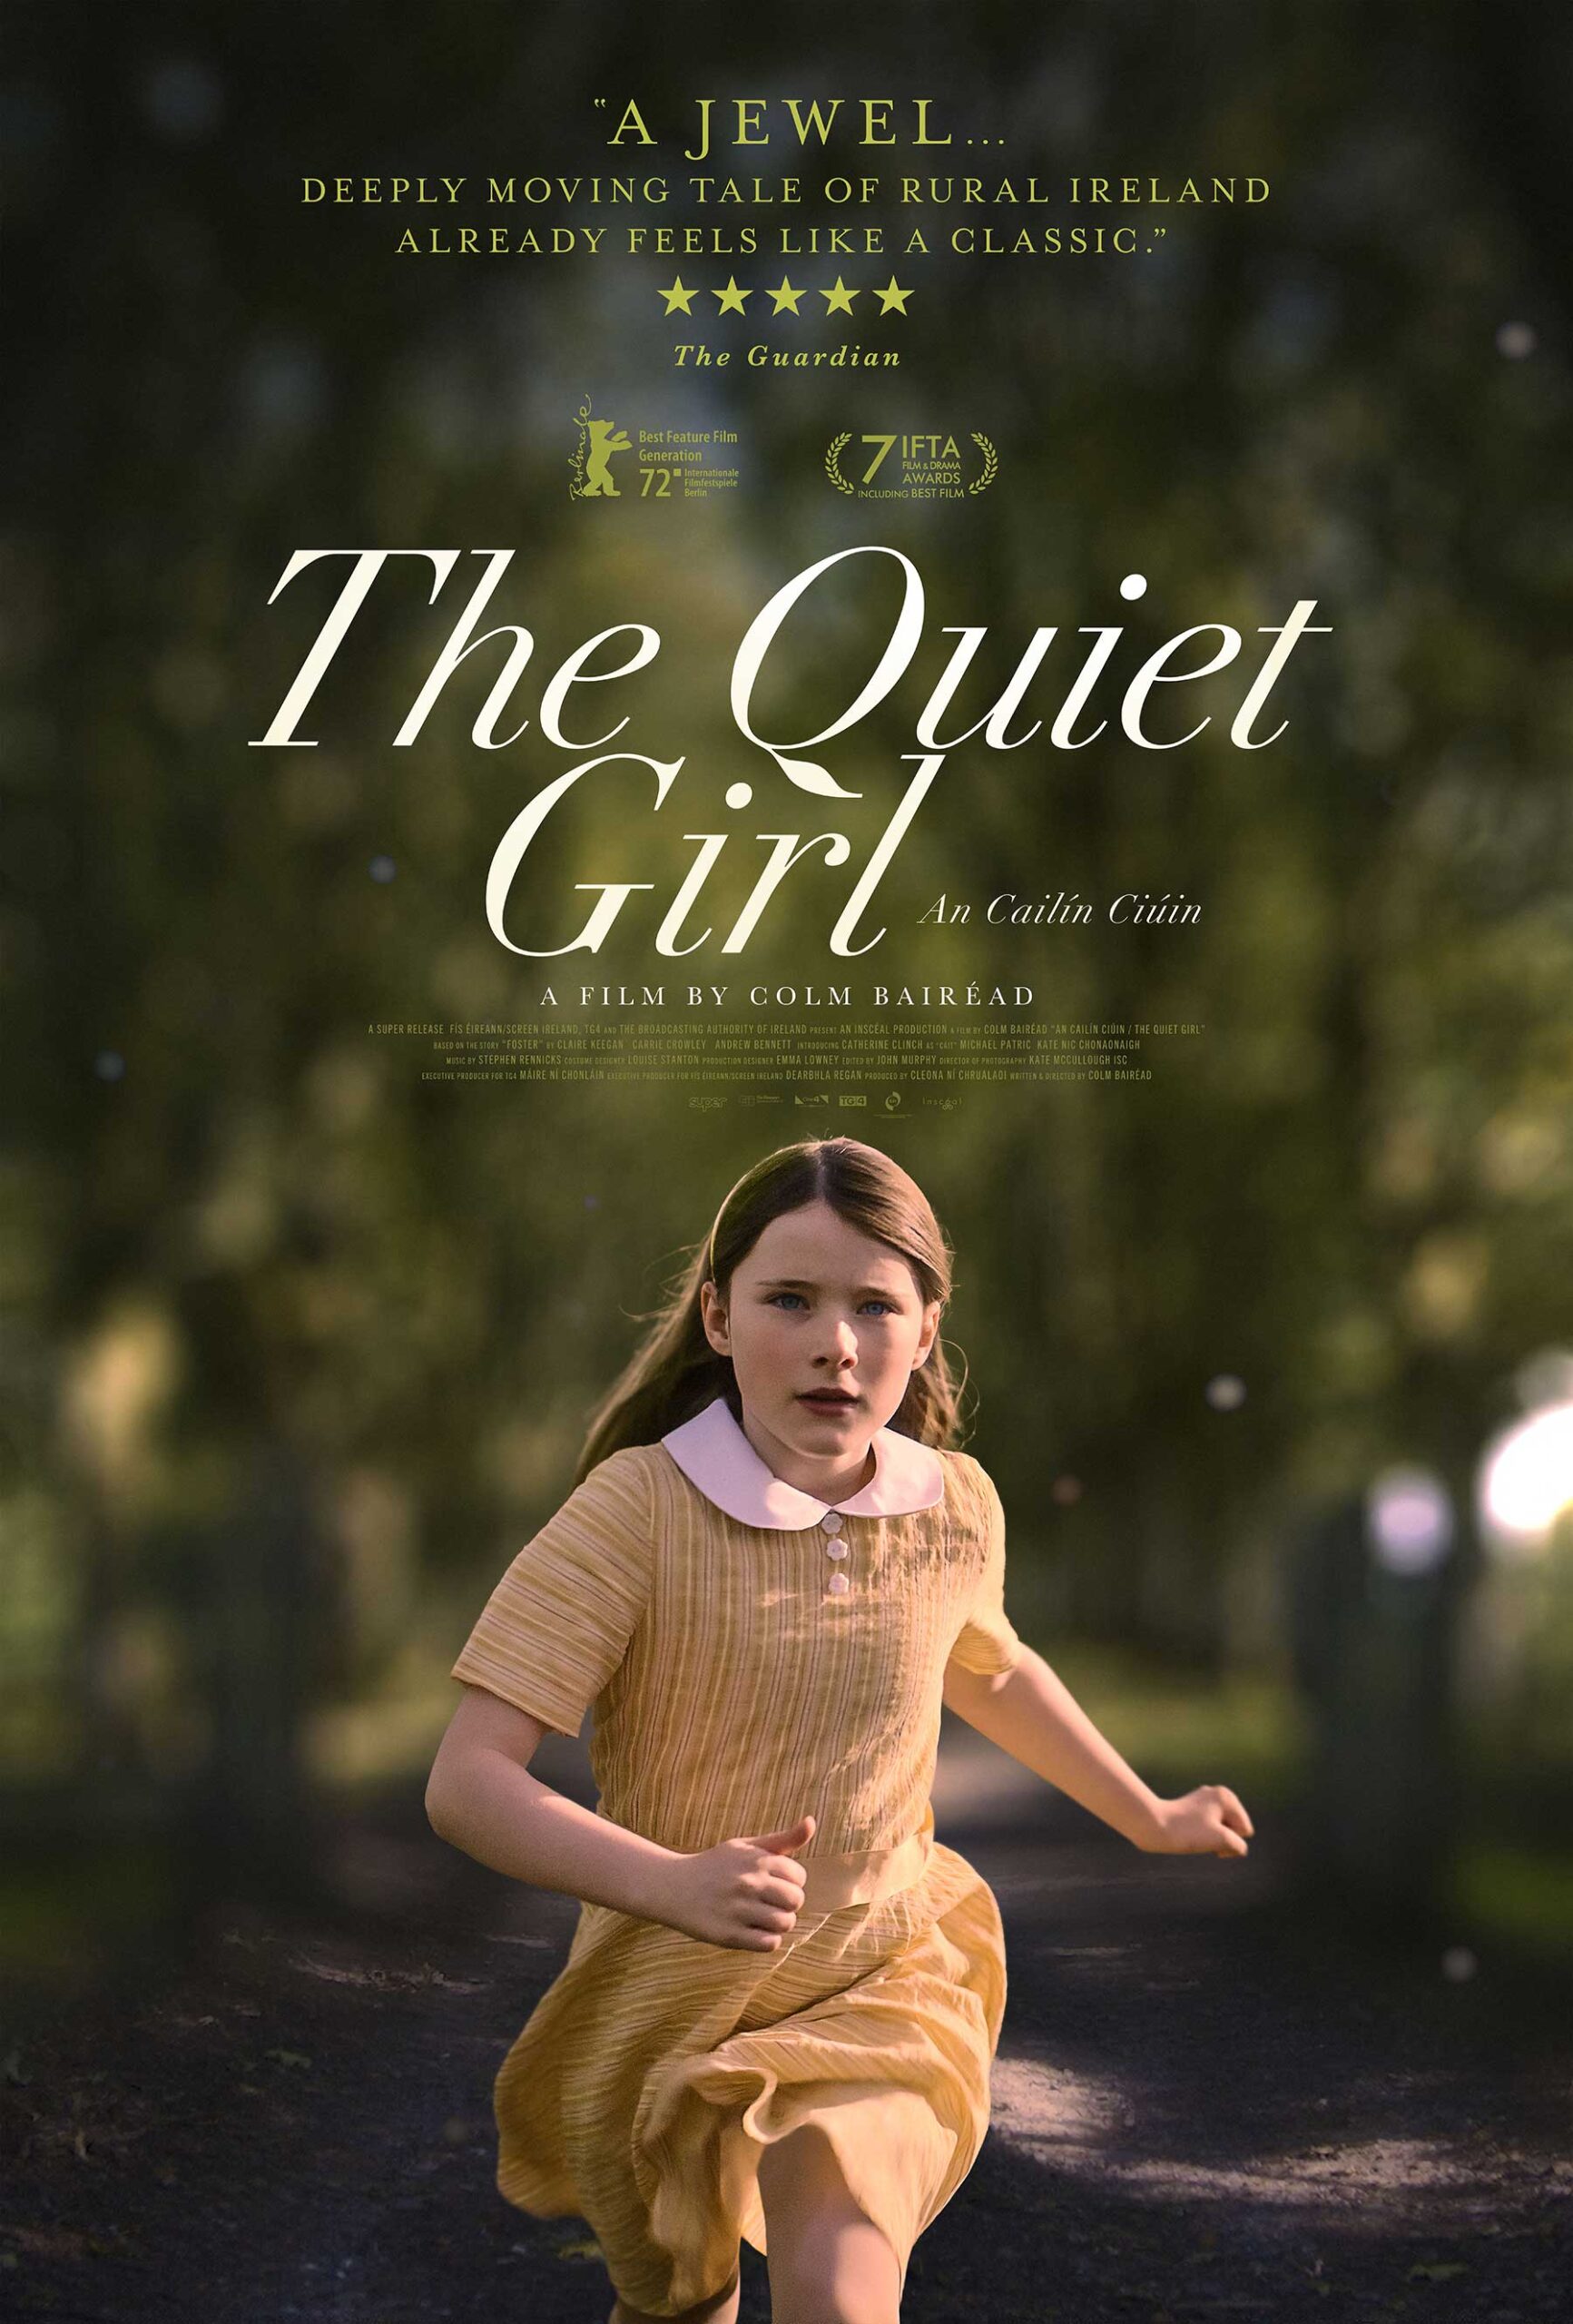 TheQuietGirl_Poster_sm